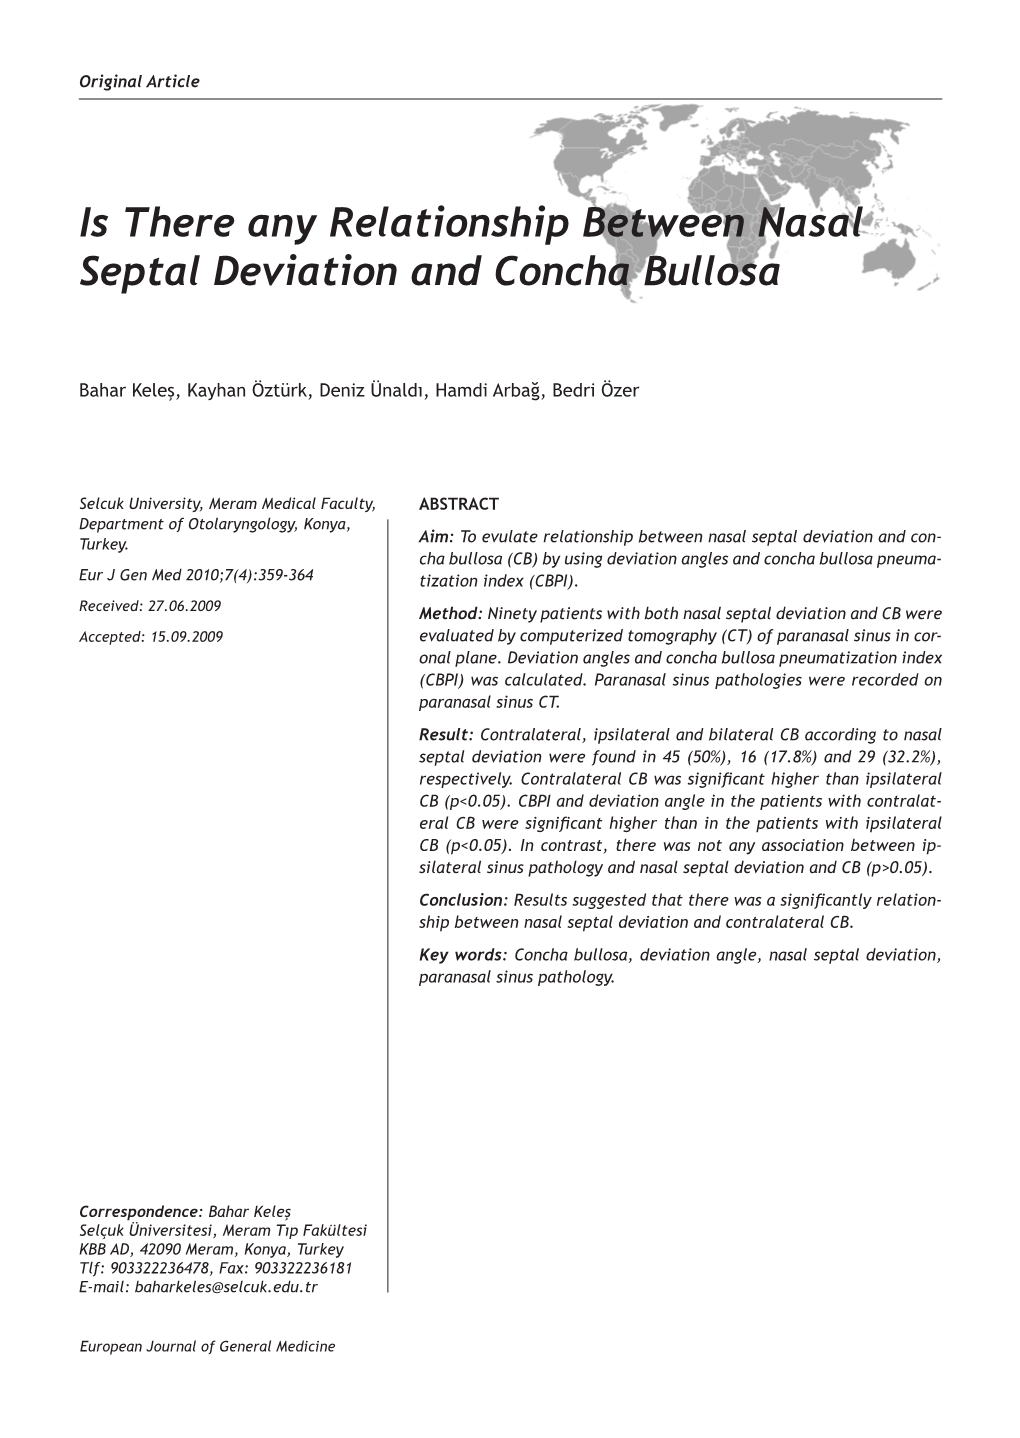 Is There Any Relationship Between Nasal Septal Deviation and Concha Bullosa